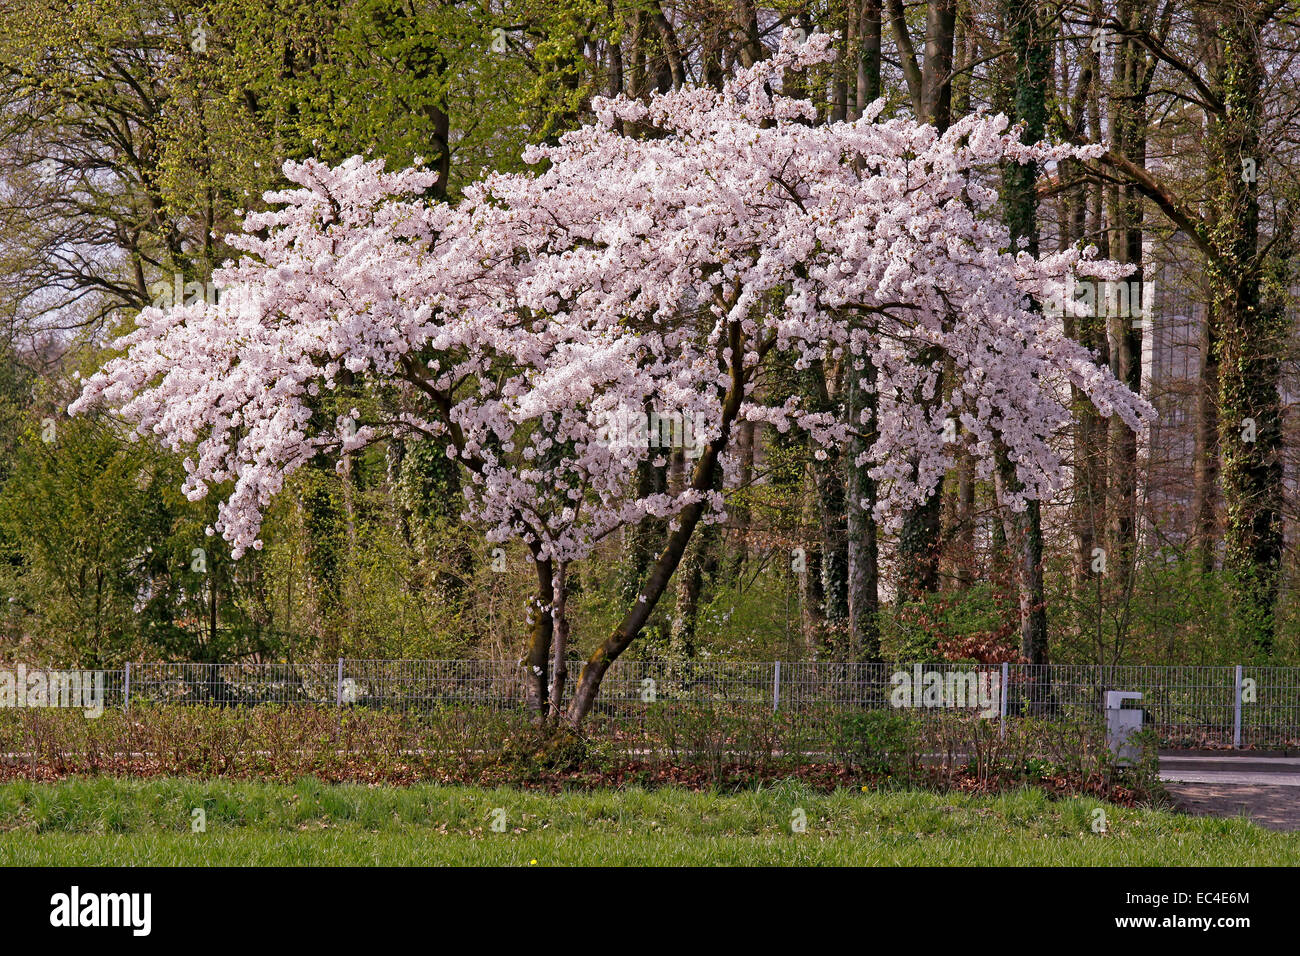 Cherry trees in spring, Lower Saxony, Germany Stock Photo